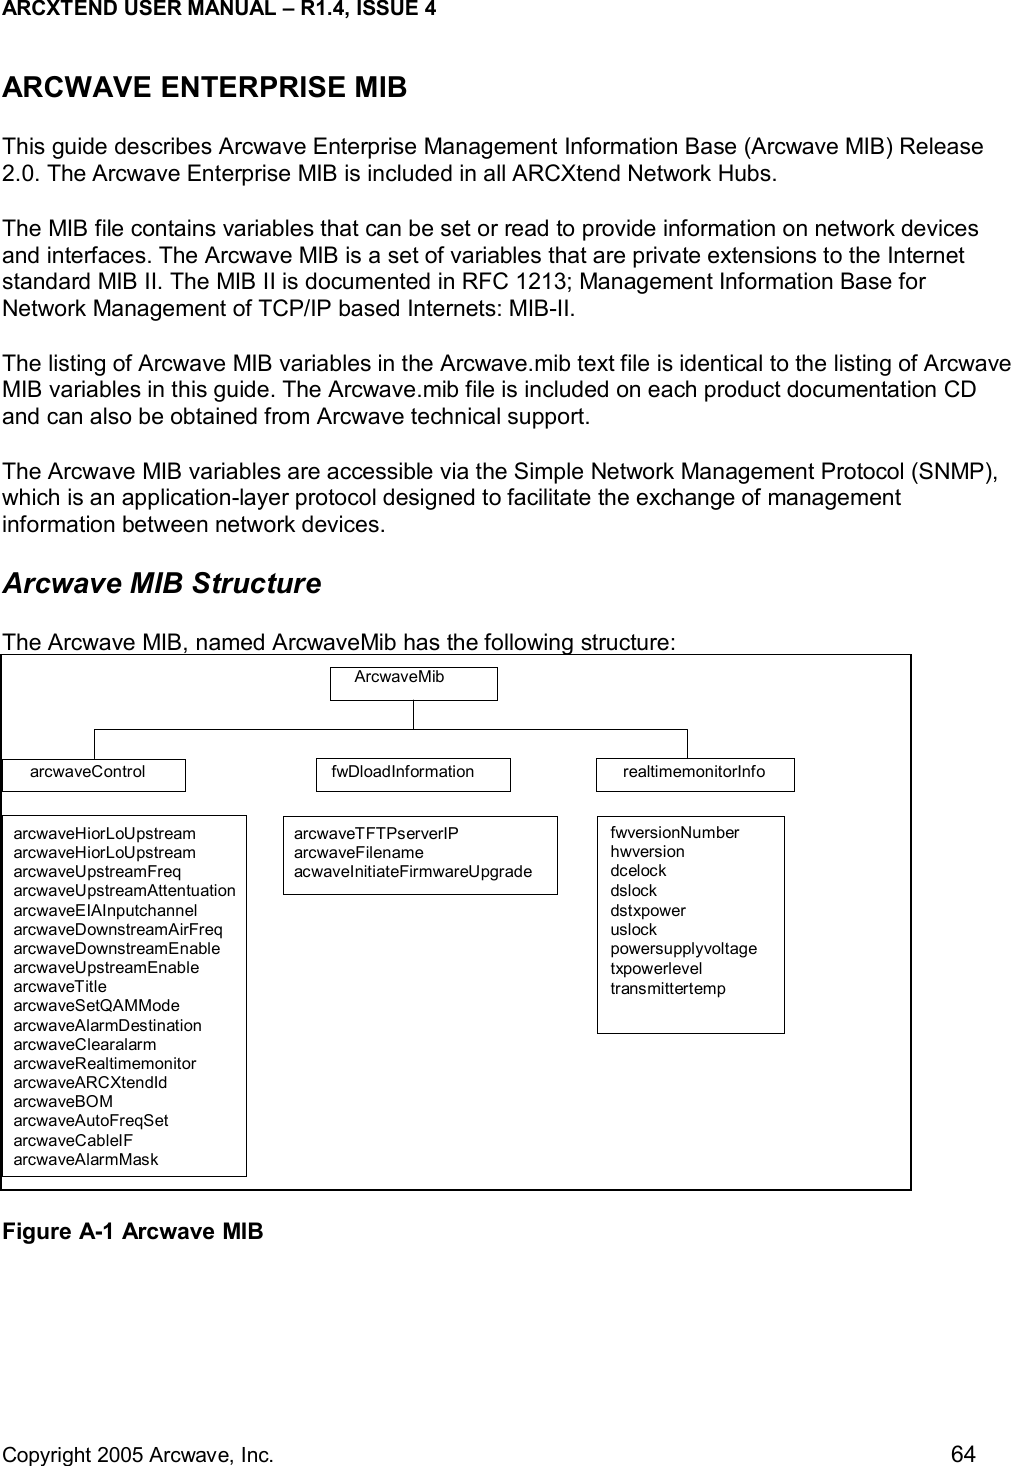 ARCXTEND USER MANUAL – R1.4, ISSUE 4  Copyright 2005 Arcwave, Inc.    64 ARCWAVE ENTERPRISE MIB This guide describes Arcwave Enterprise Management Information Base (Arcwave MIB) Release 2.0. The Arcwave Enterprise MIB is included in all ARCXtend Network Hubs.  The MIB file contains variables that can be set or read to provide information on network devices and interfaces. The Arcwave MIB is a set of variables that are private extensions to the Internet standard MIB II. The MIB II is documented in RFC 1213; Management Information Base for Network Management of TCP/IP based Internets: MIB-II.  The listing of Arcwave MIB variables in the Arcwave.mib text file is identical to the listing of Arcwave MIB variables in this guide. The Arcwave.mib file is included on each product documentation CD and can also be obtained from Arcwave technical support. The Arcwave MIB variables are accessible via the Simple Network Management Protocol (SNMP), which is an application-layer protocol designed to facilitate the exchange of management information between network devices.  Arcwave MIB Structure The Arcwave MIB, named ArcwaveMib has the following structure:  Figure A-1 Arcwave MIB   ArcwaveMib  arcwaveControl   fwDloadInformation realtimemonitorInfo  arcwaveHiorLoUpstream arcwaveHiorLoUpstream arcwaveUpstreamFreq arcwaveUpstreamAttentuation arcwaveEIAInputchannel arcwaveDownstreamAirFreq arcwaveDownstreamEnable arcwaveUpstreamEnable arcwaveTitle arcwaveSetQAMMode arcwaveAlarmDestination arcwaveClearalarm arcwaveRealtimemonitor arcwaveARCXtendId arcwaveBOM arcwaveAutoFreqSet arcwaveCableIF arcwaveAlarmMask   arcwaveTFTPs erverIP arcwaveFilename acwaveInitiateFirmwareUpgrade   fwversionNumber hwversiondcelock dslock dstxpoweruslock powersupplyvoltage  txpowerlevel transmittertemp 